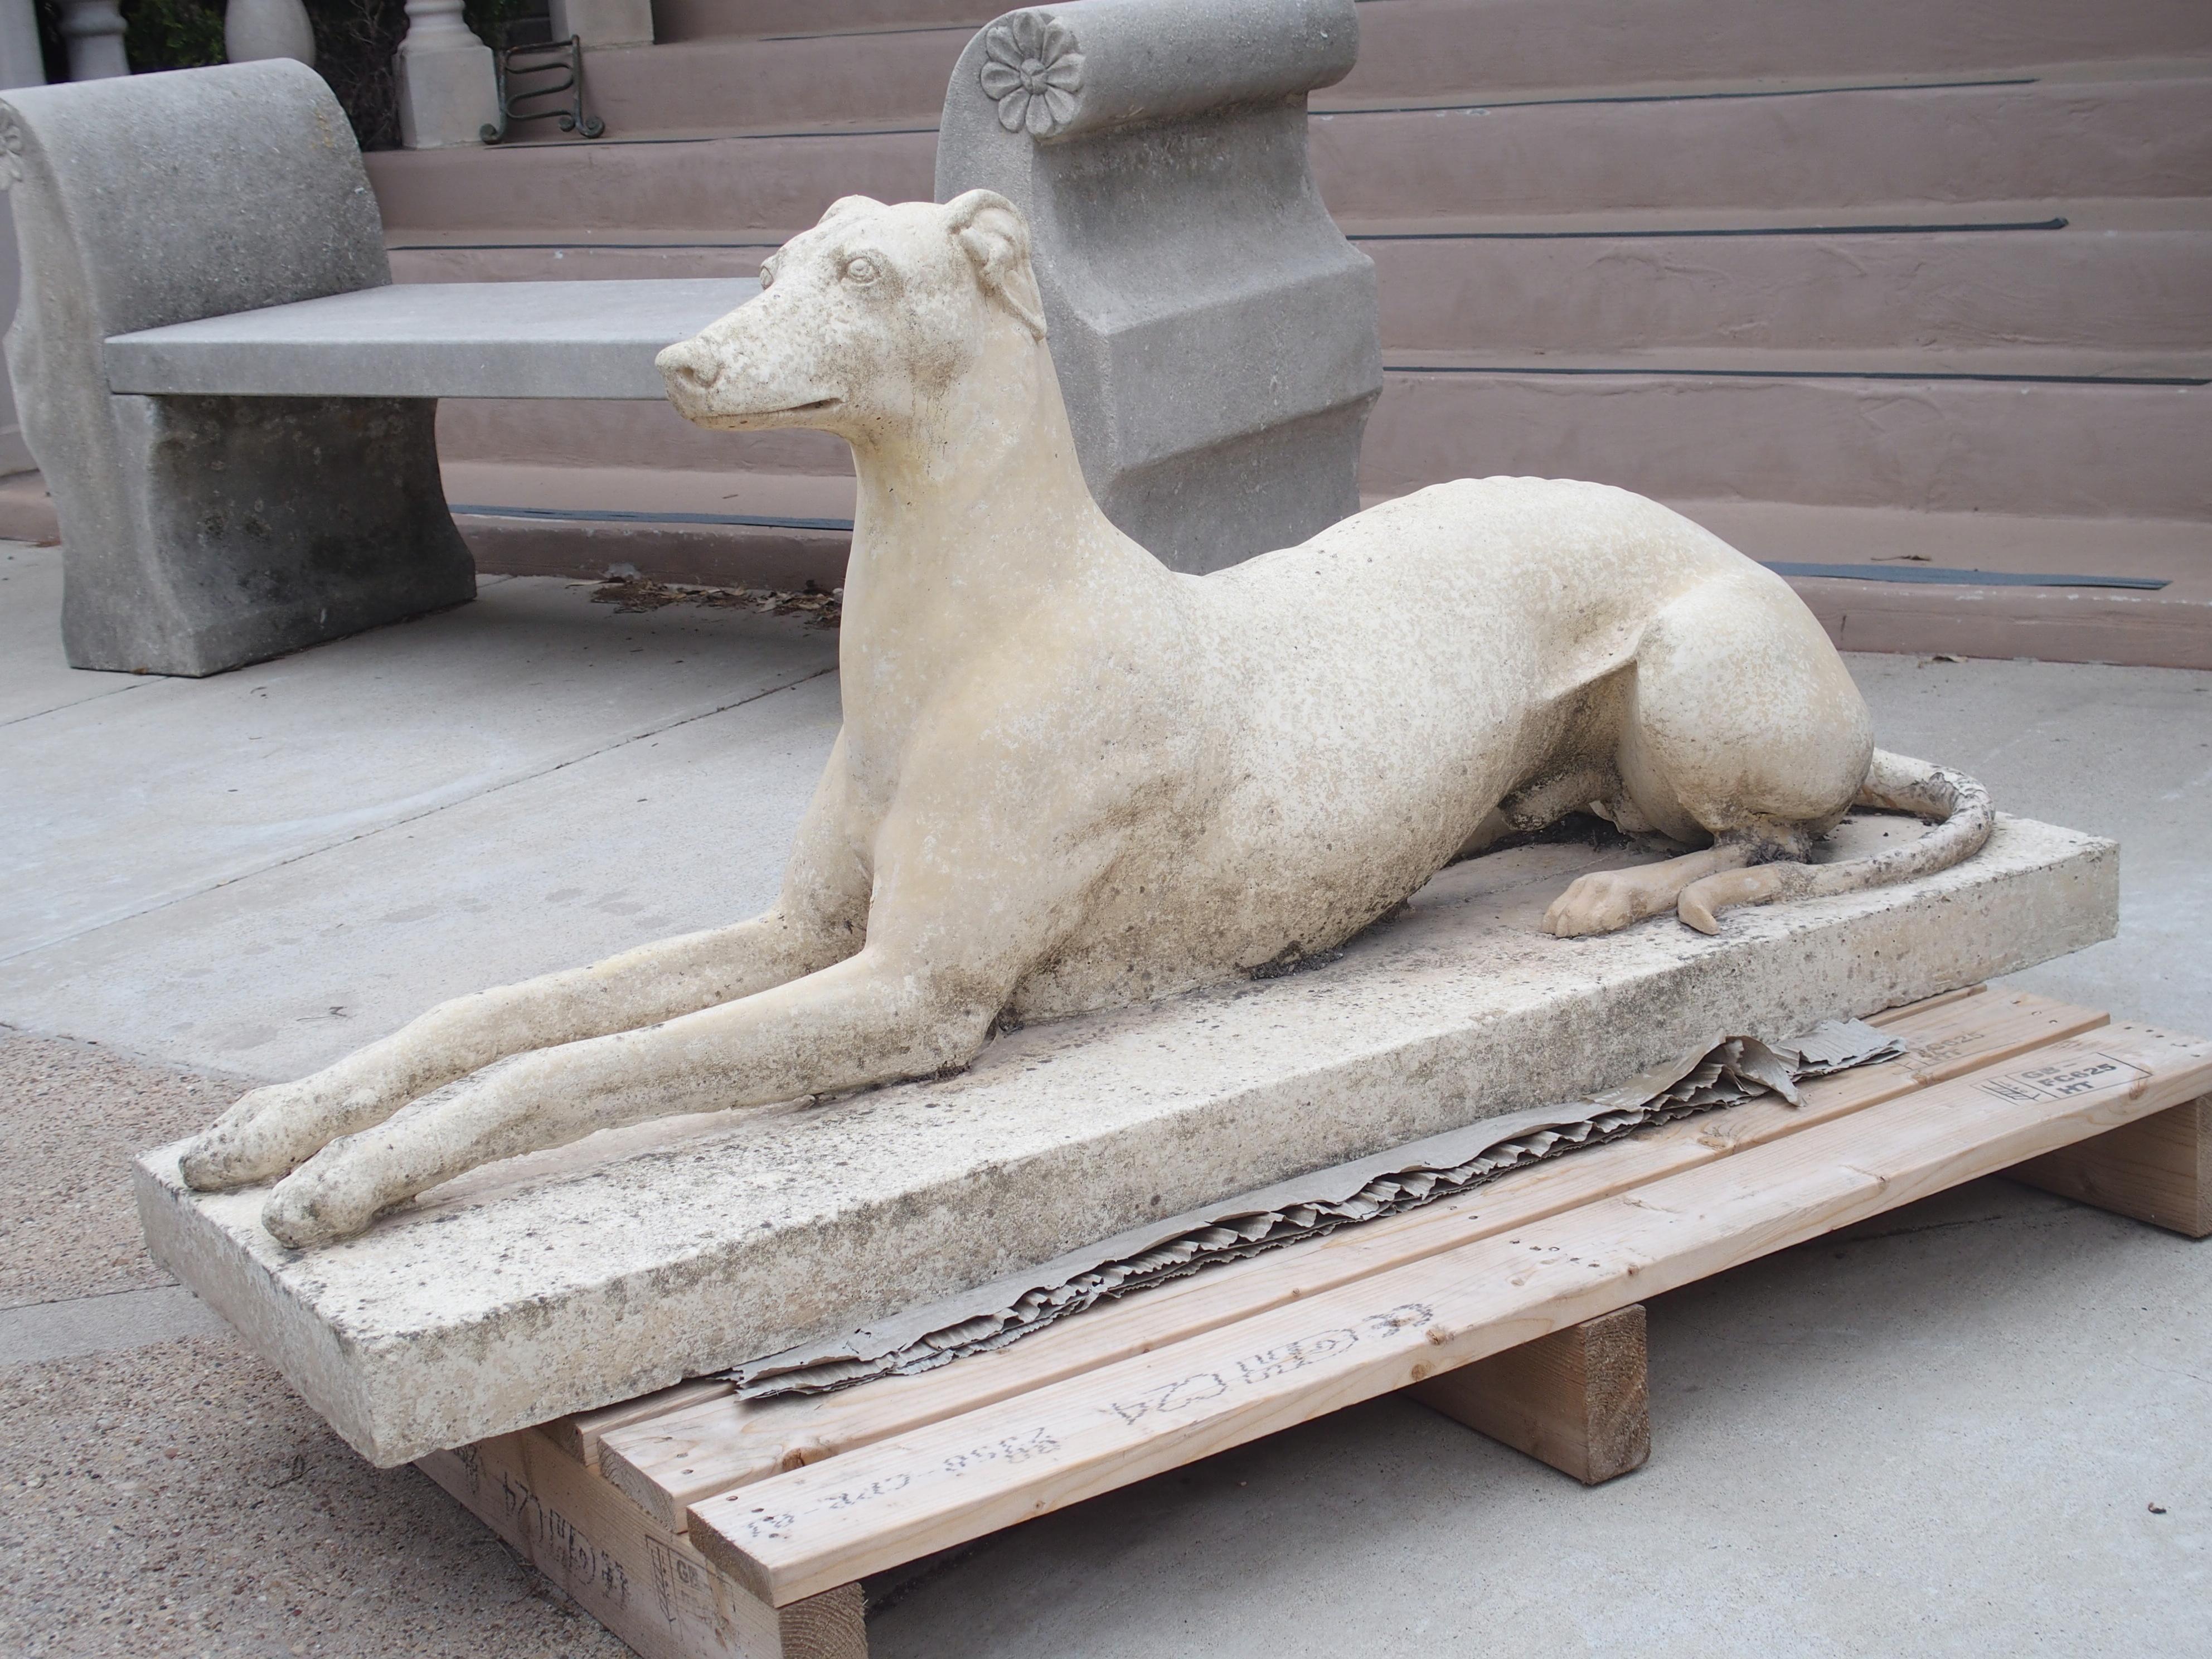 A regal and life-sized composite stone greyhound garden statue from England, the stoic dog has been cast in a recumbent position on top of a three inch thick rectangular base. The dog is looking alertly into the distance, with its ears pinned back.